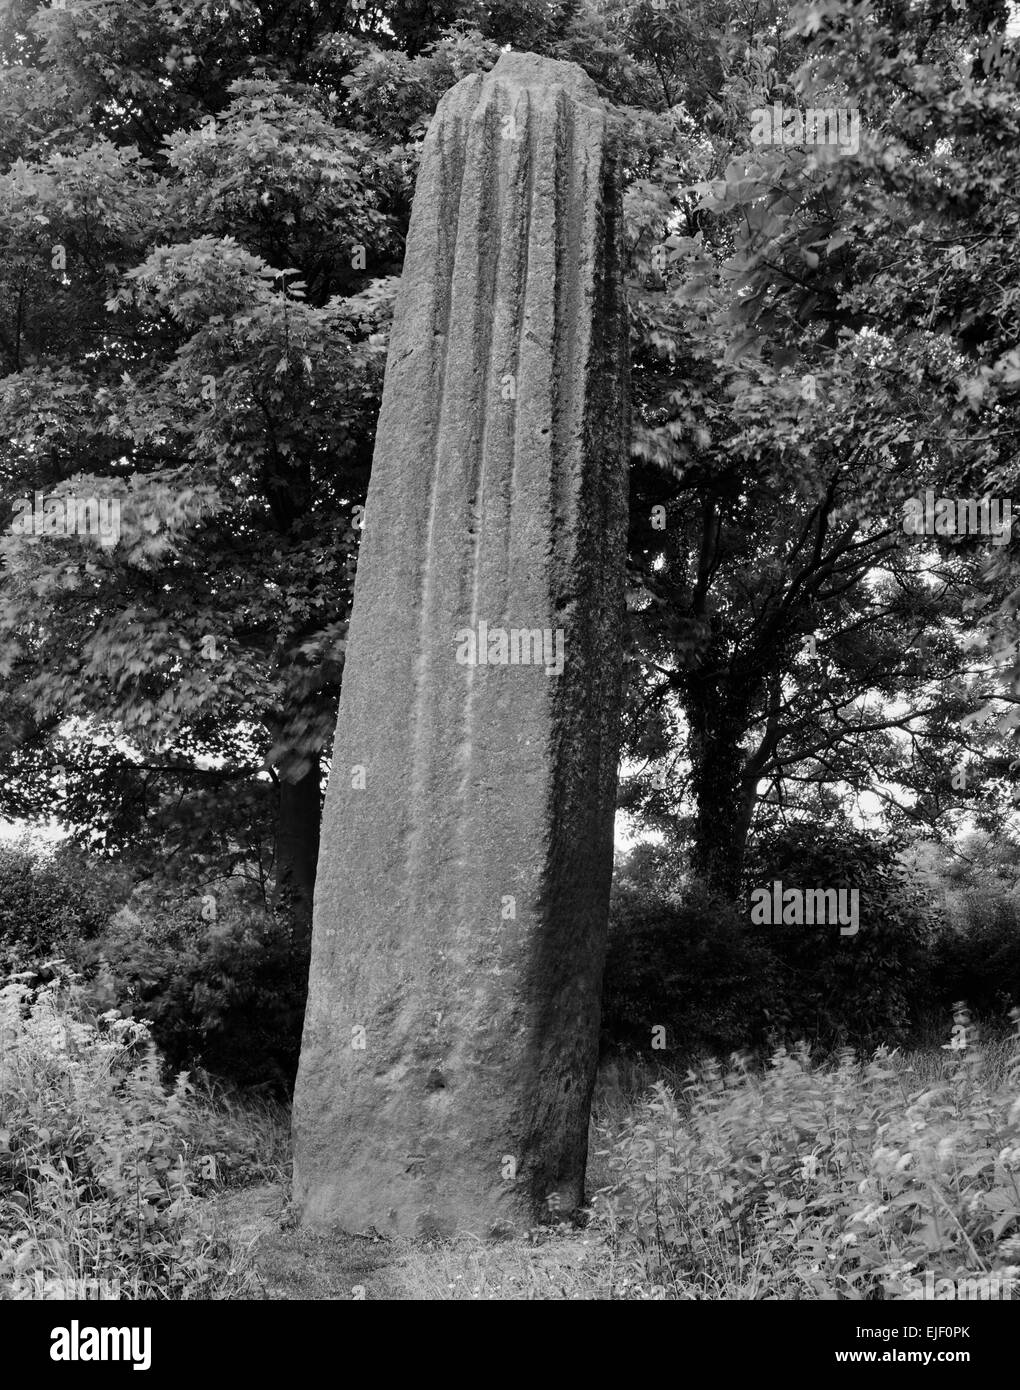 Looking SE at the S stone of the Devil's Arrows, Boroughbridge, North Yorkshire, a line of three prehistoric standing stones of millstone grit. Stock Photo